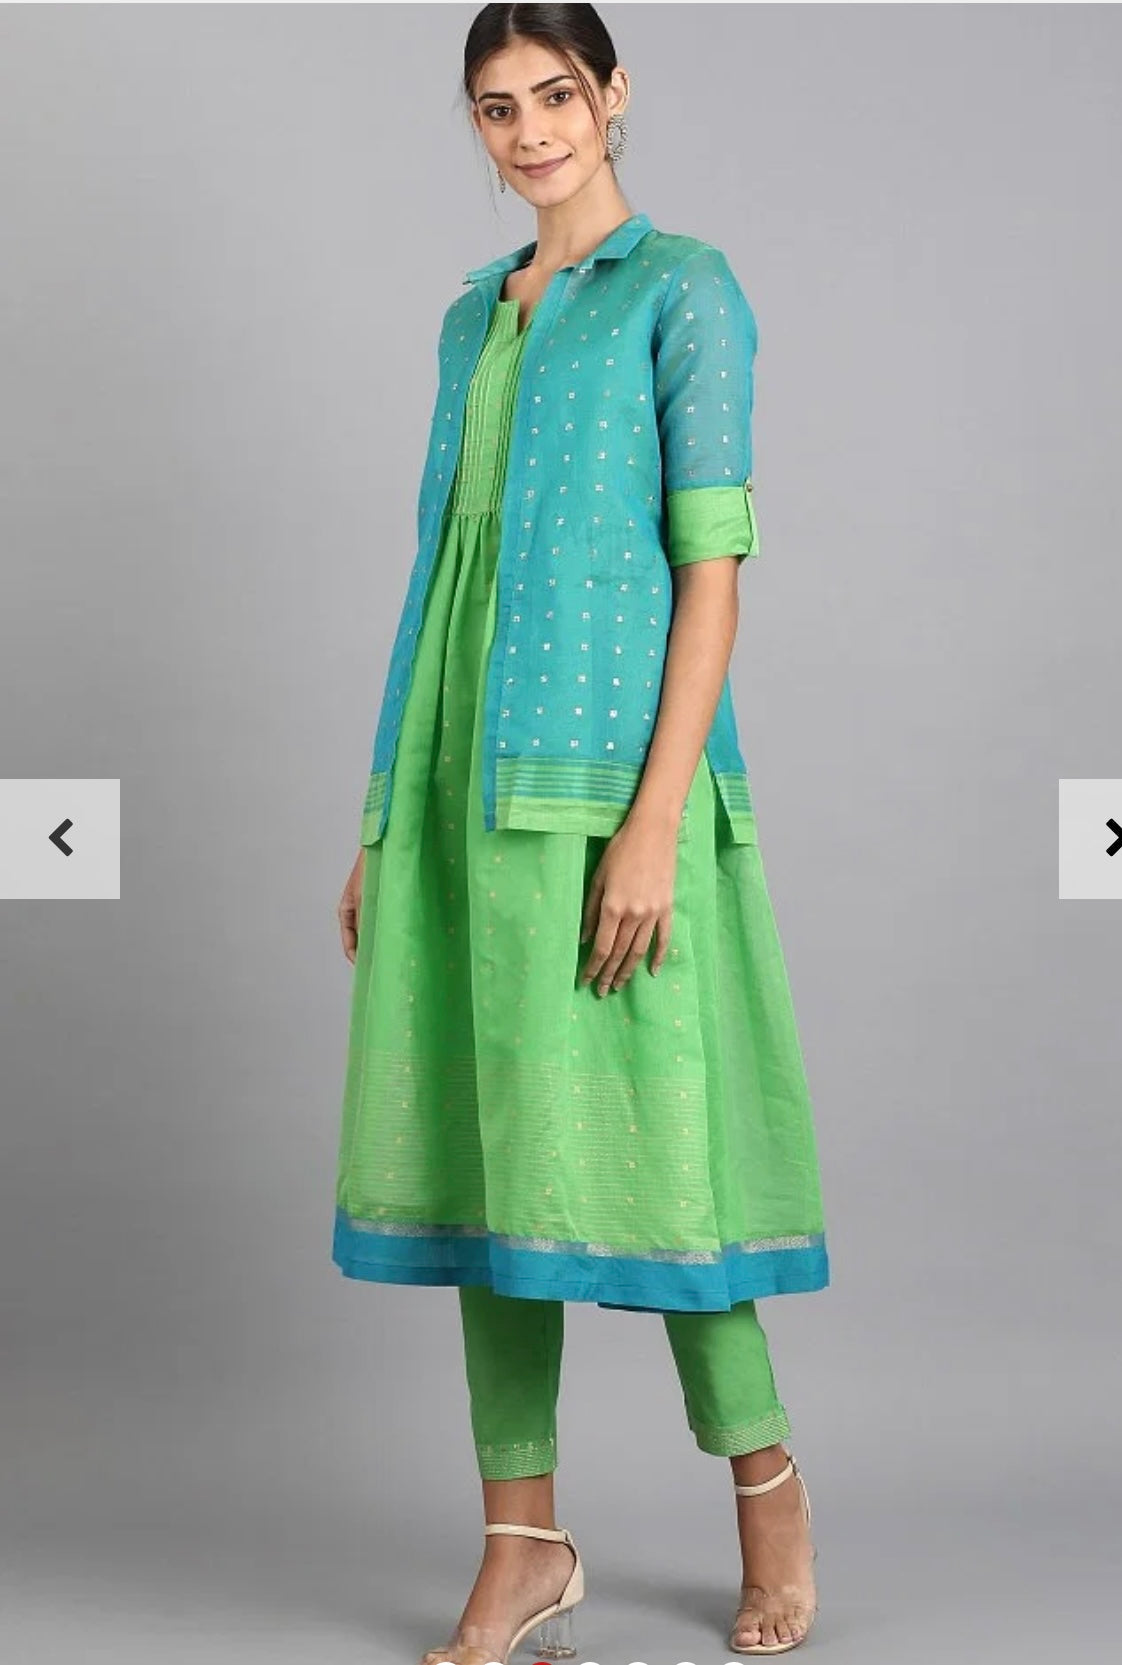 W Brand Green and Blue Cotton Salwar Suit Set - Size 34(XS)